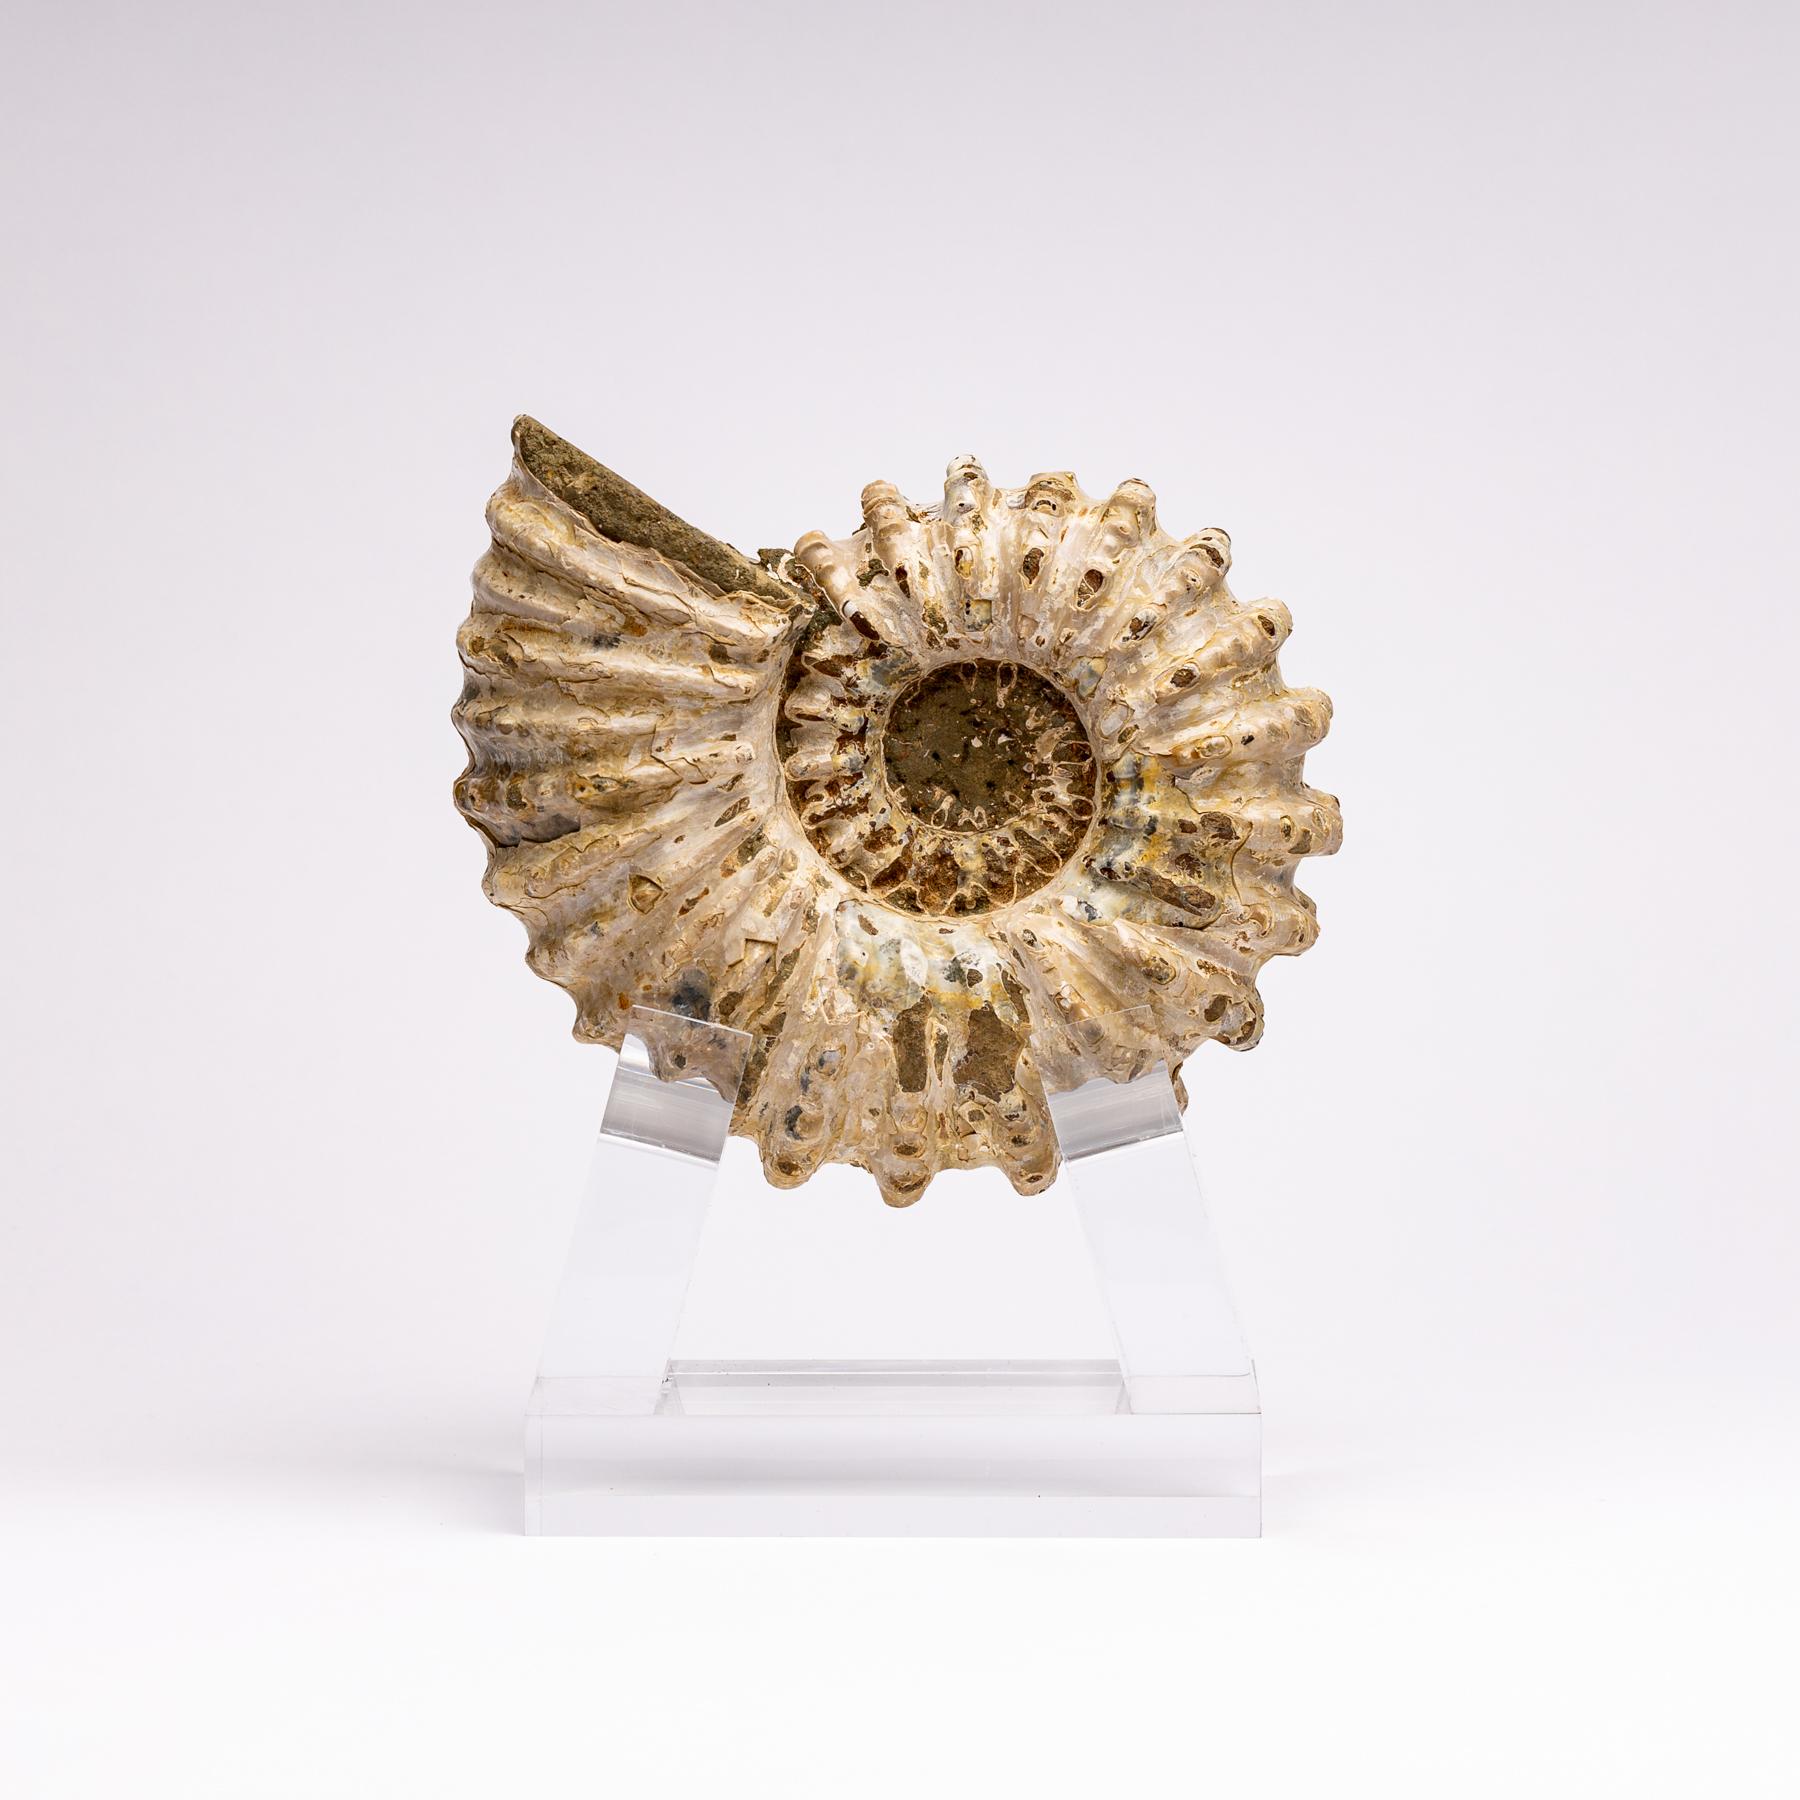 Douvilleiceras Ammonite
Period: Cretaceous 65 - 144 Million years old
Ammonites were squid-like predatory creatures that lived inside spiral-shaped shells. The ammonite shell was constantly developing as they grew, but they only lived in the outer